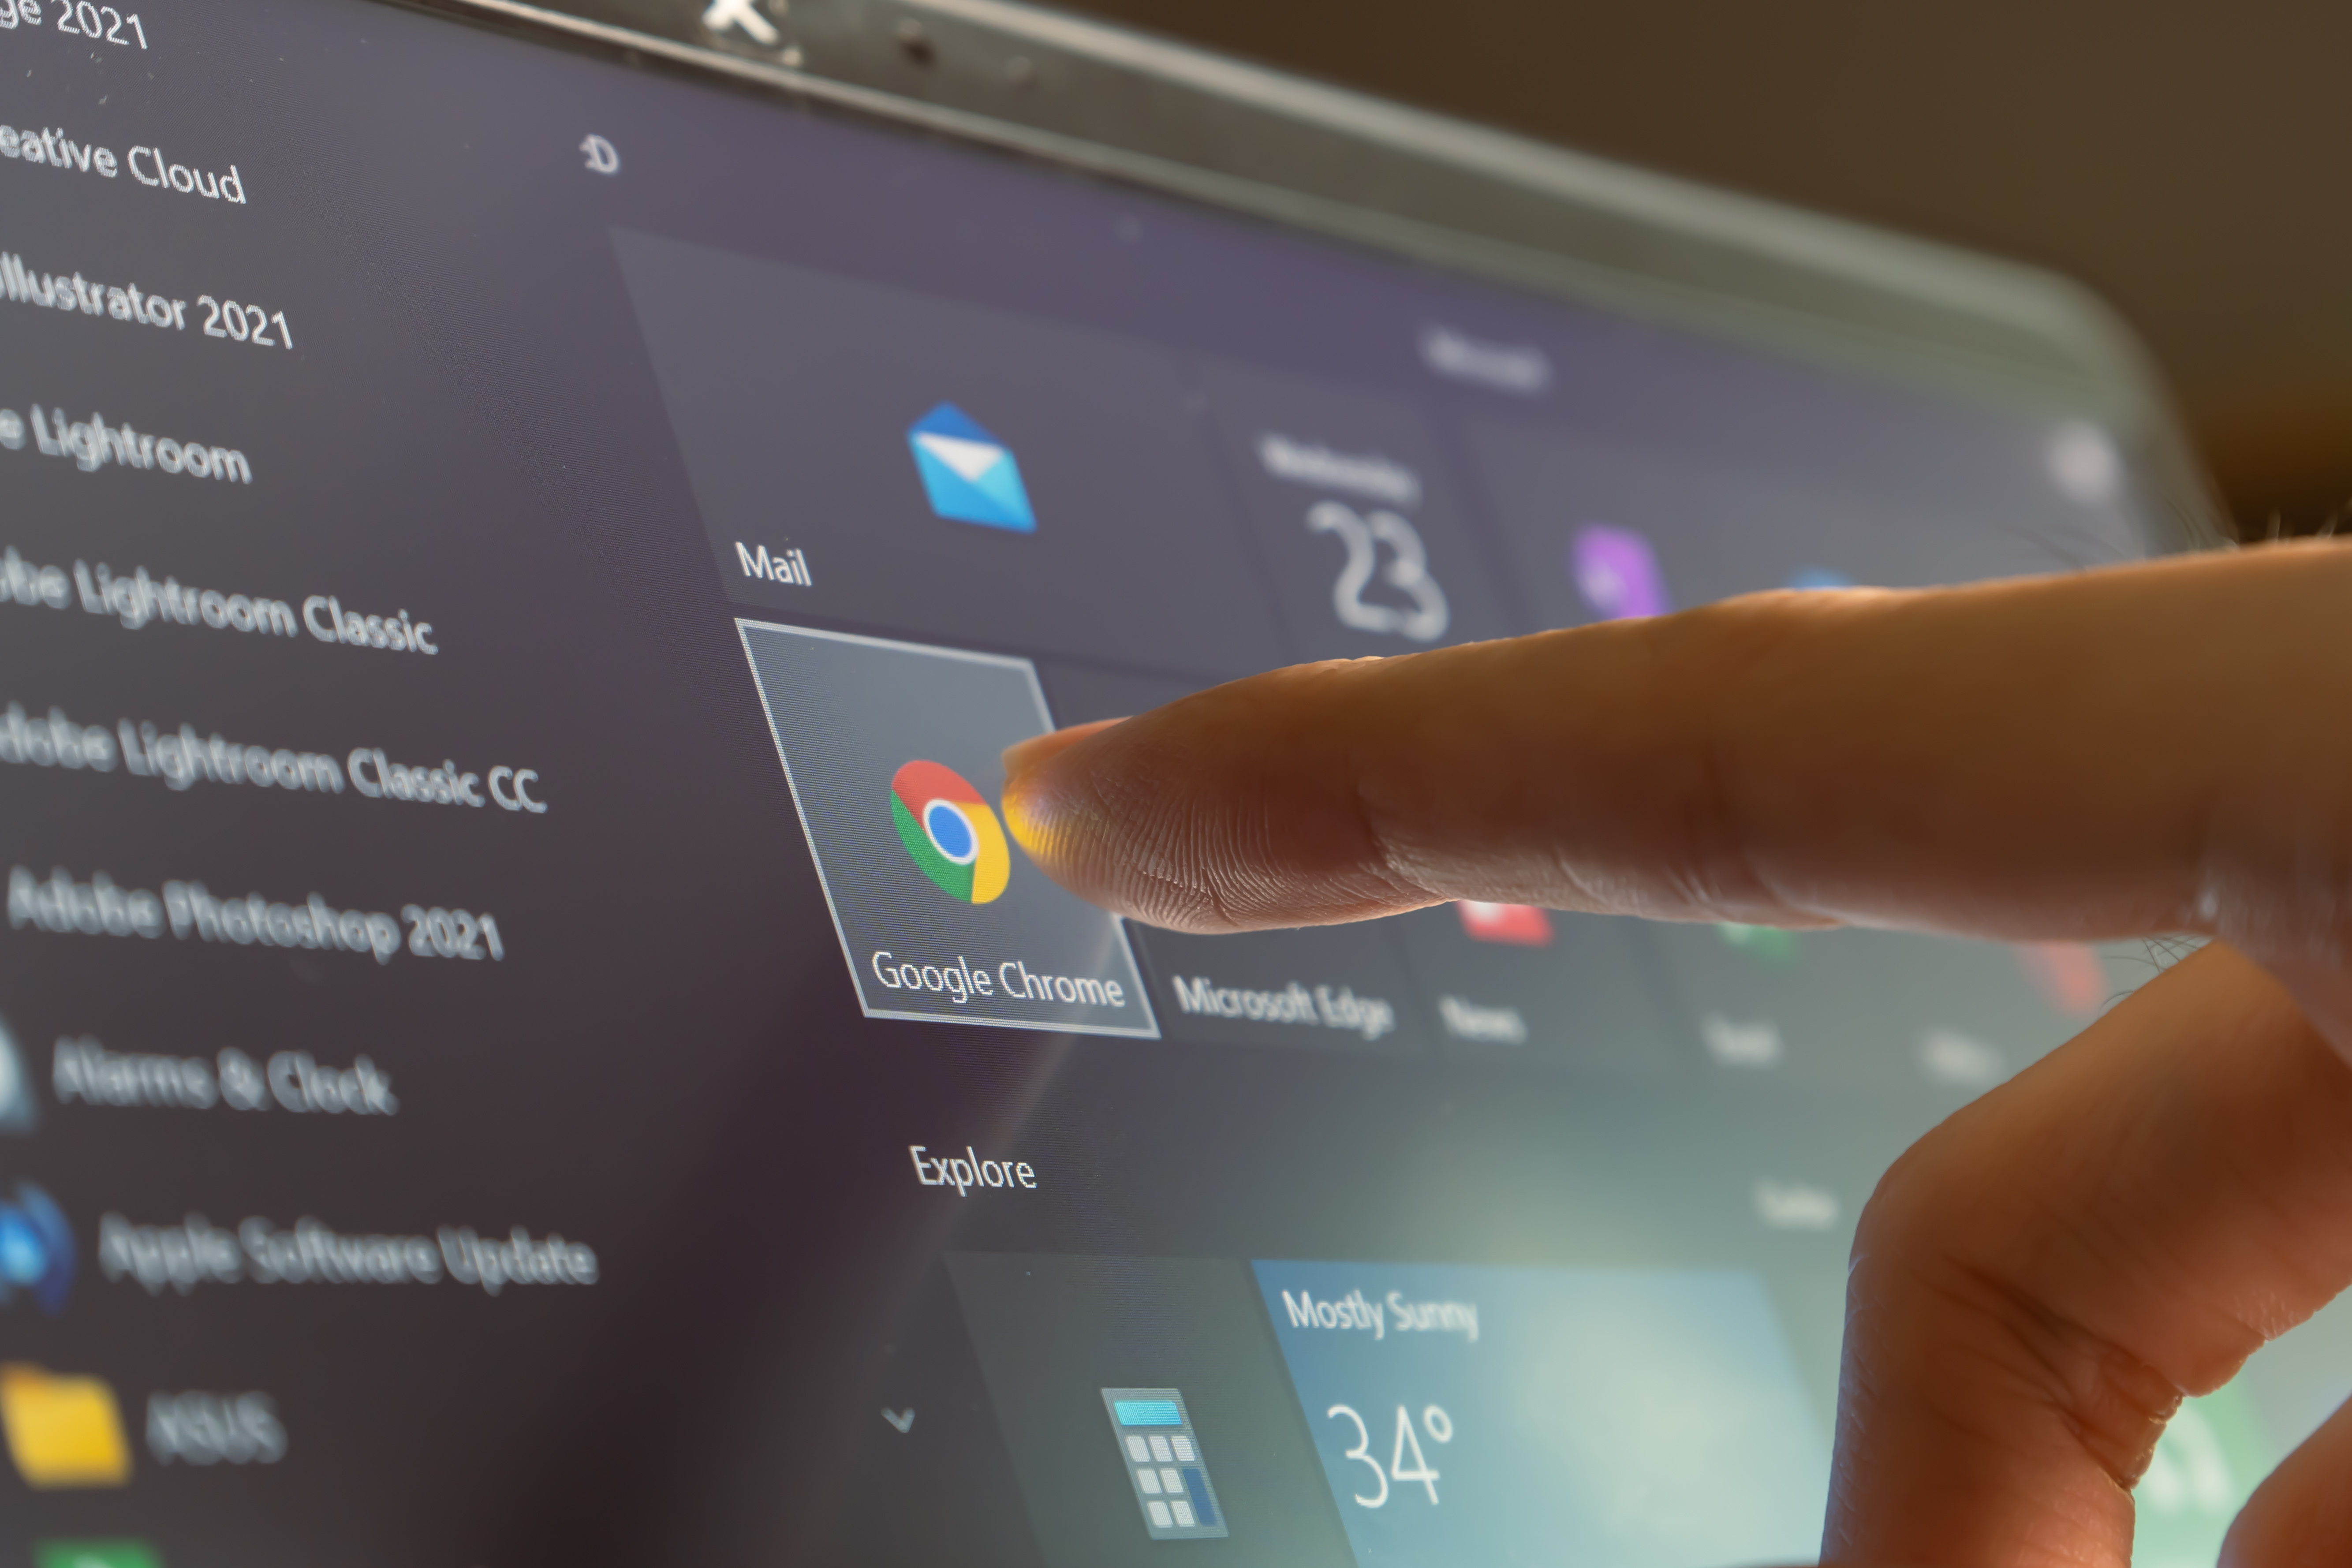 a person touching the google chorme logo on a touch display